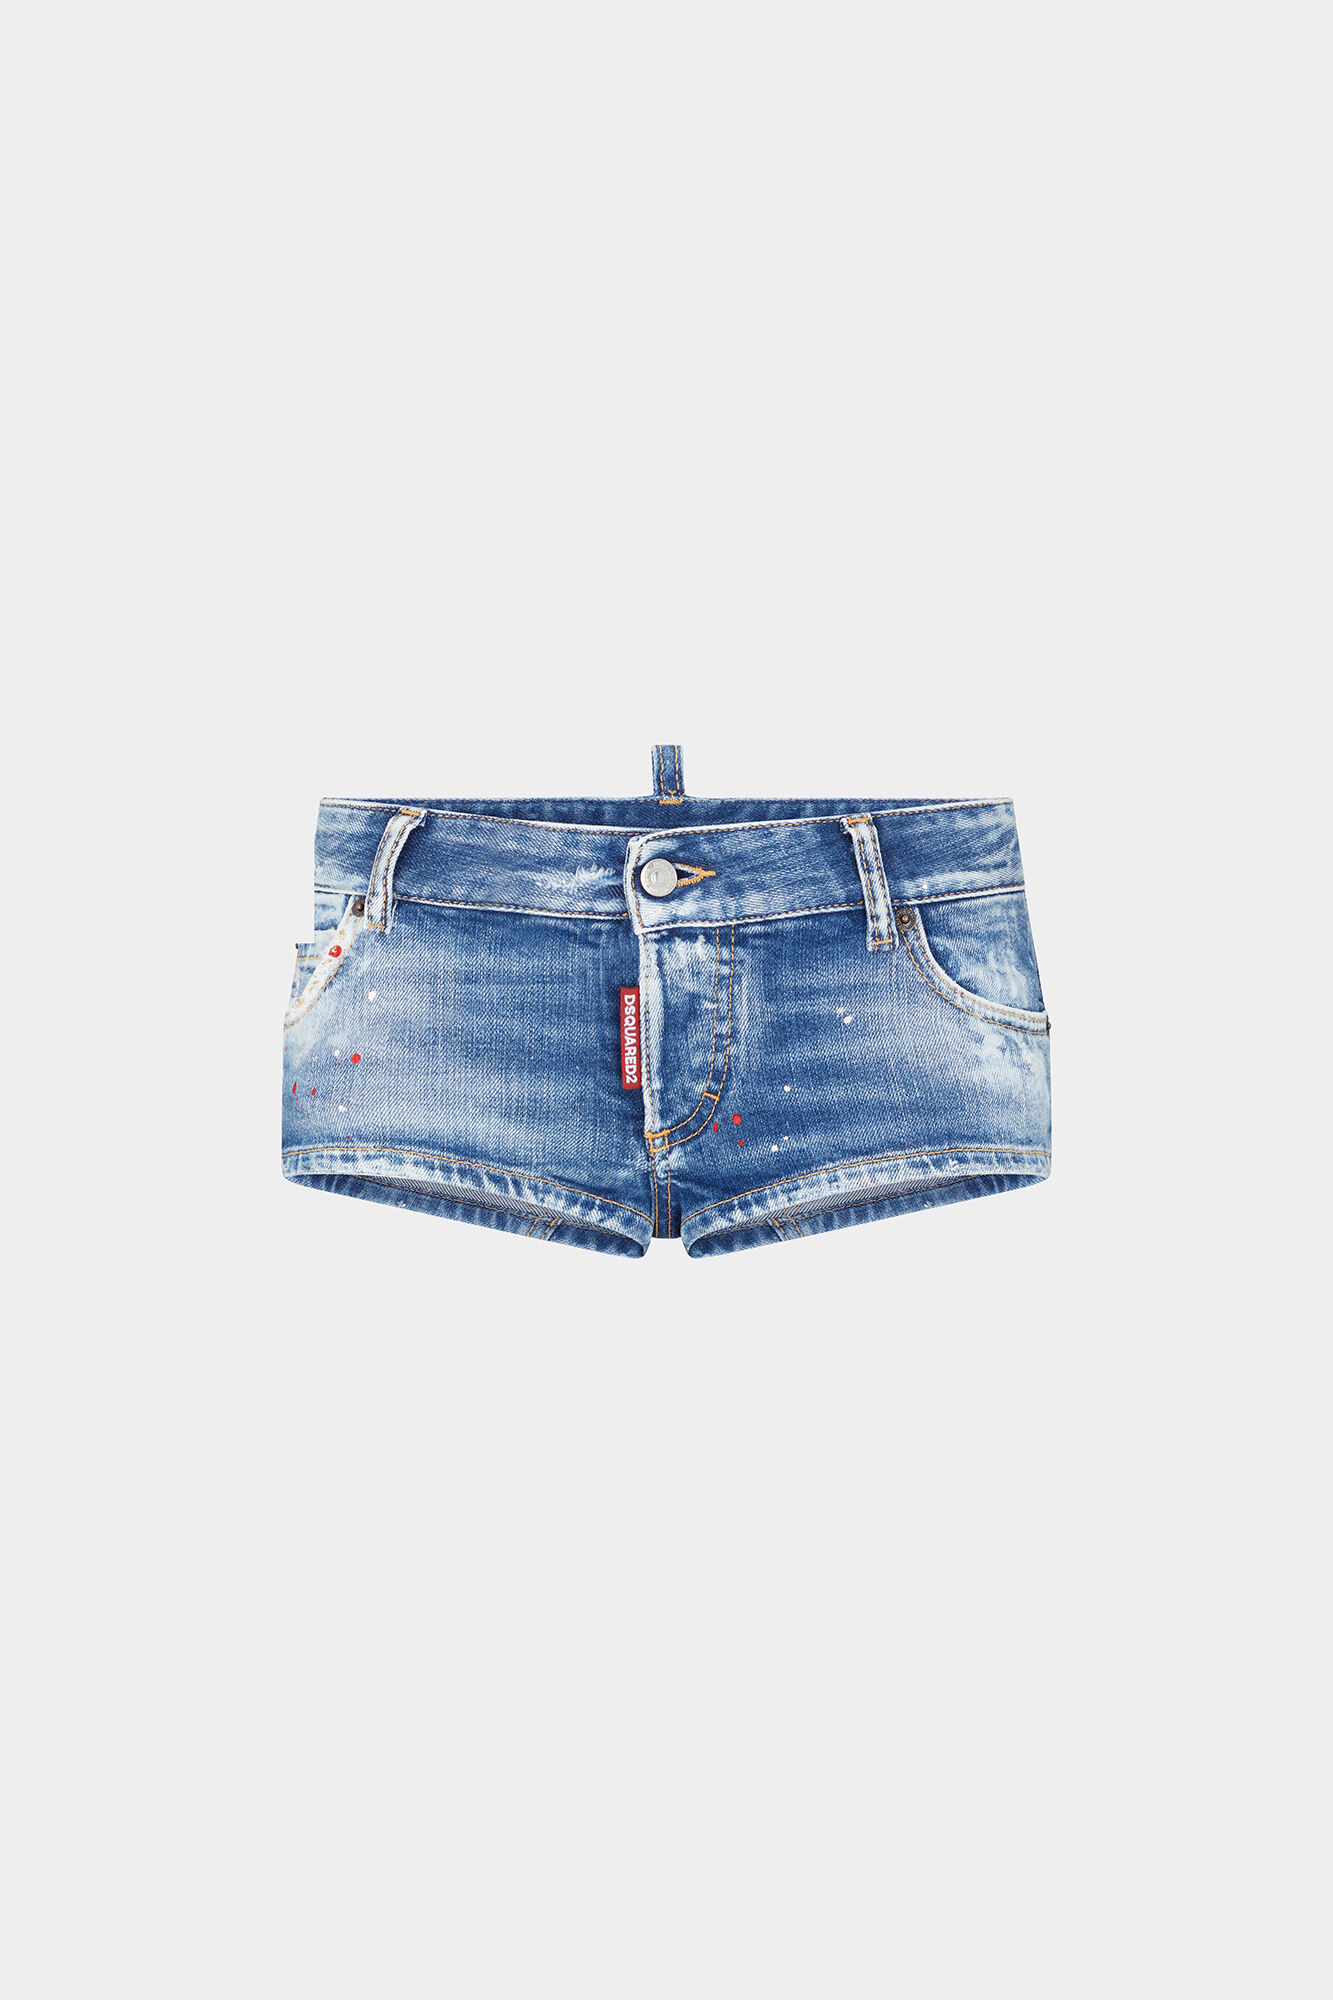 FEOYA Womens Cheeky Denim Shorts Sexy Cut Off Mini Hot Pants With Lace Up  Fringe For Summer Clubwear From T_shirt_x, $16.32 | DHgate.Com